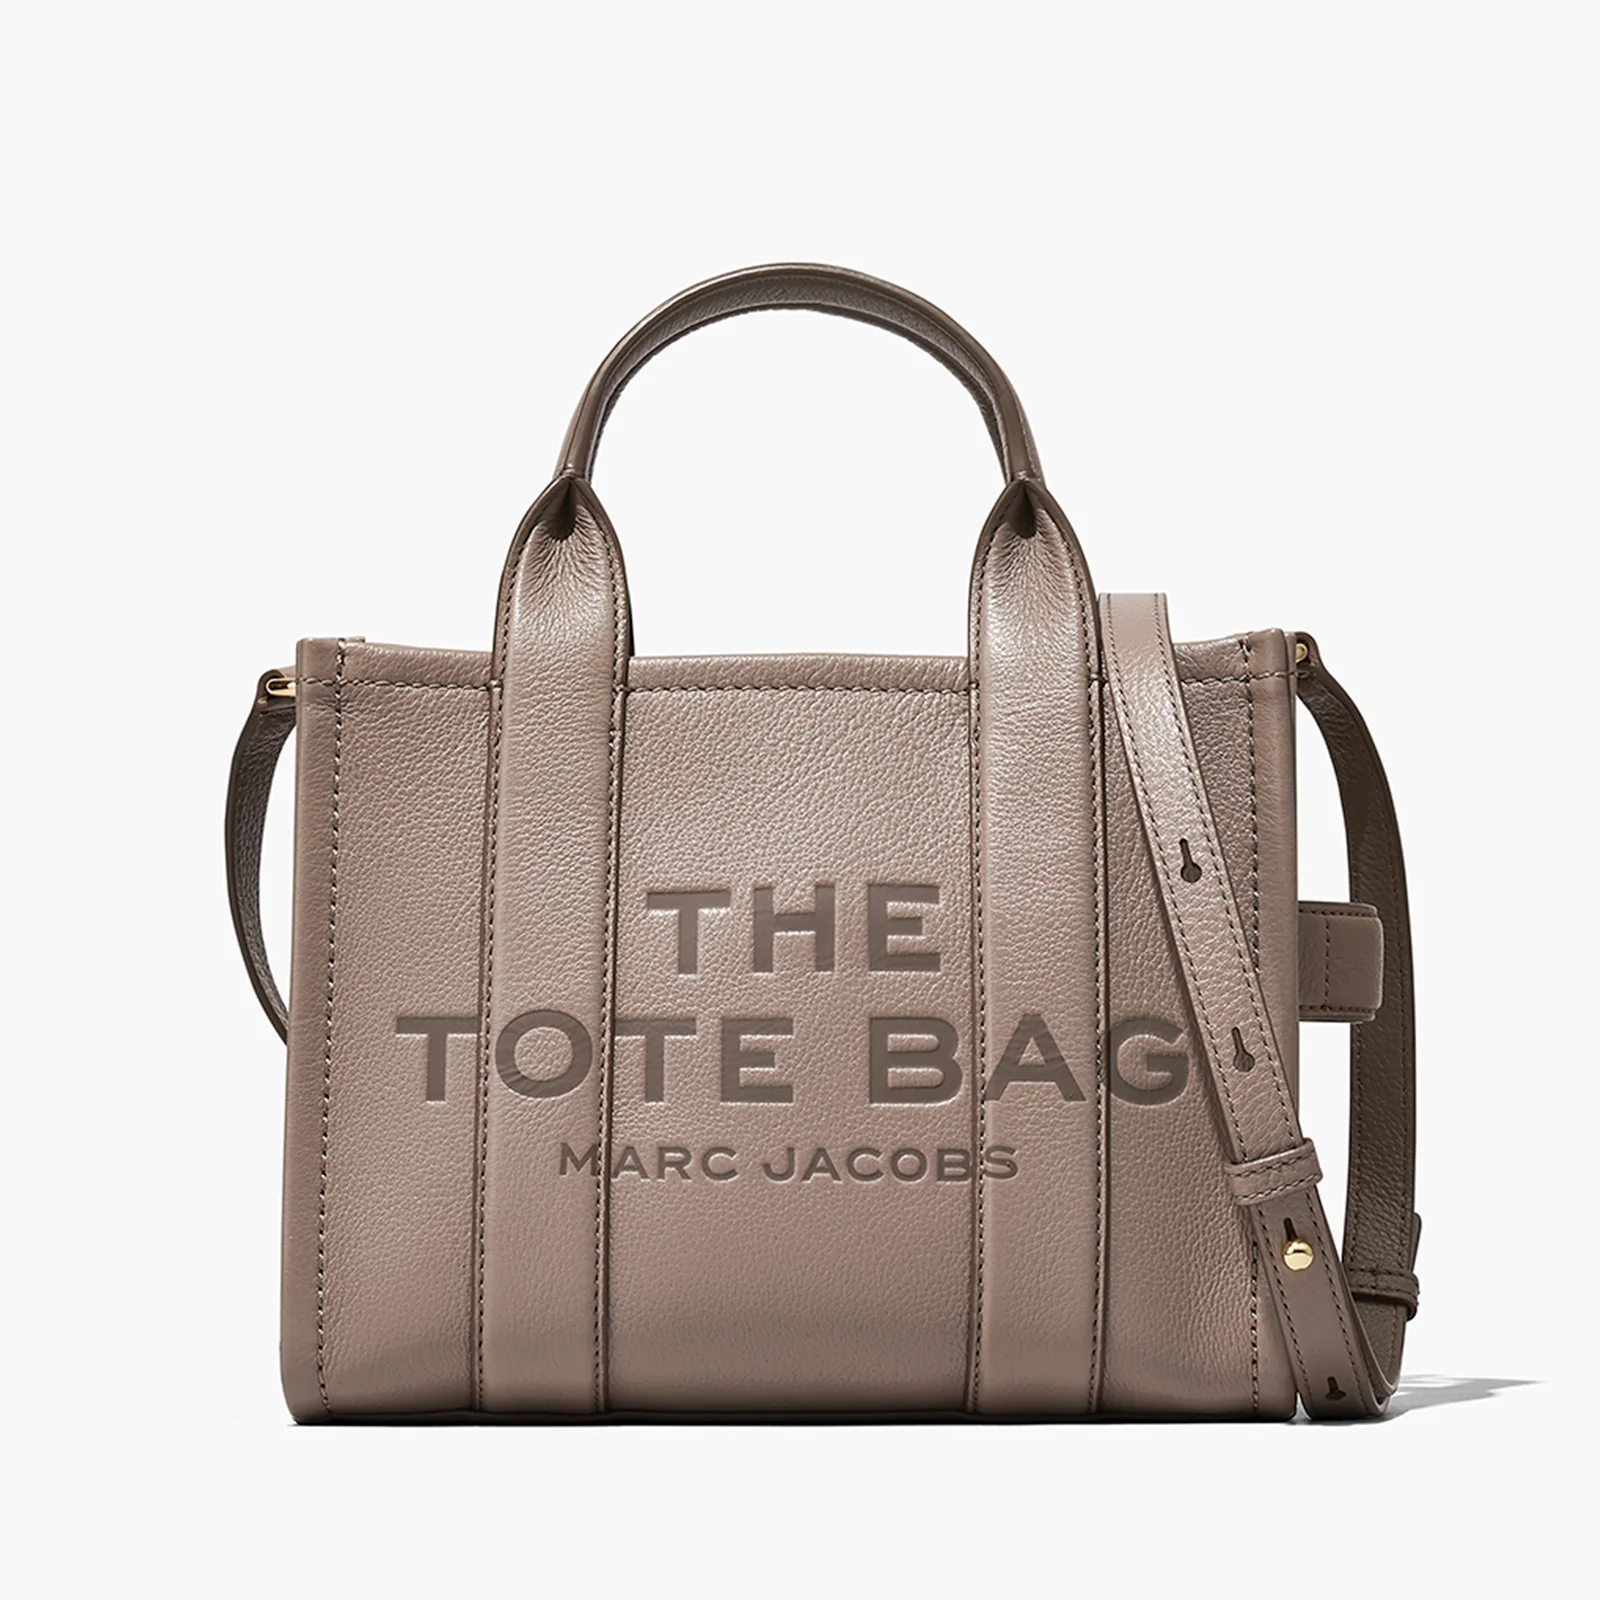 Marc Jacobs Women's The Small Leather Tote Bag - Cement Image 1